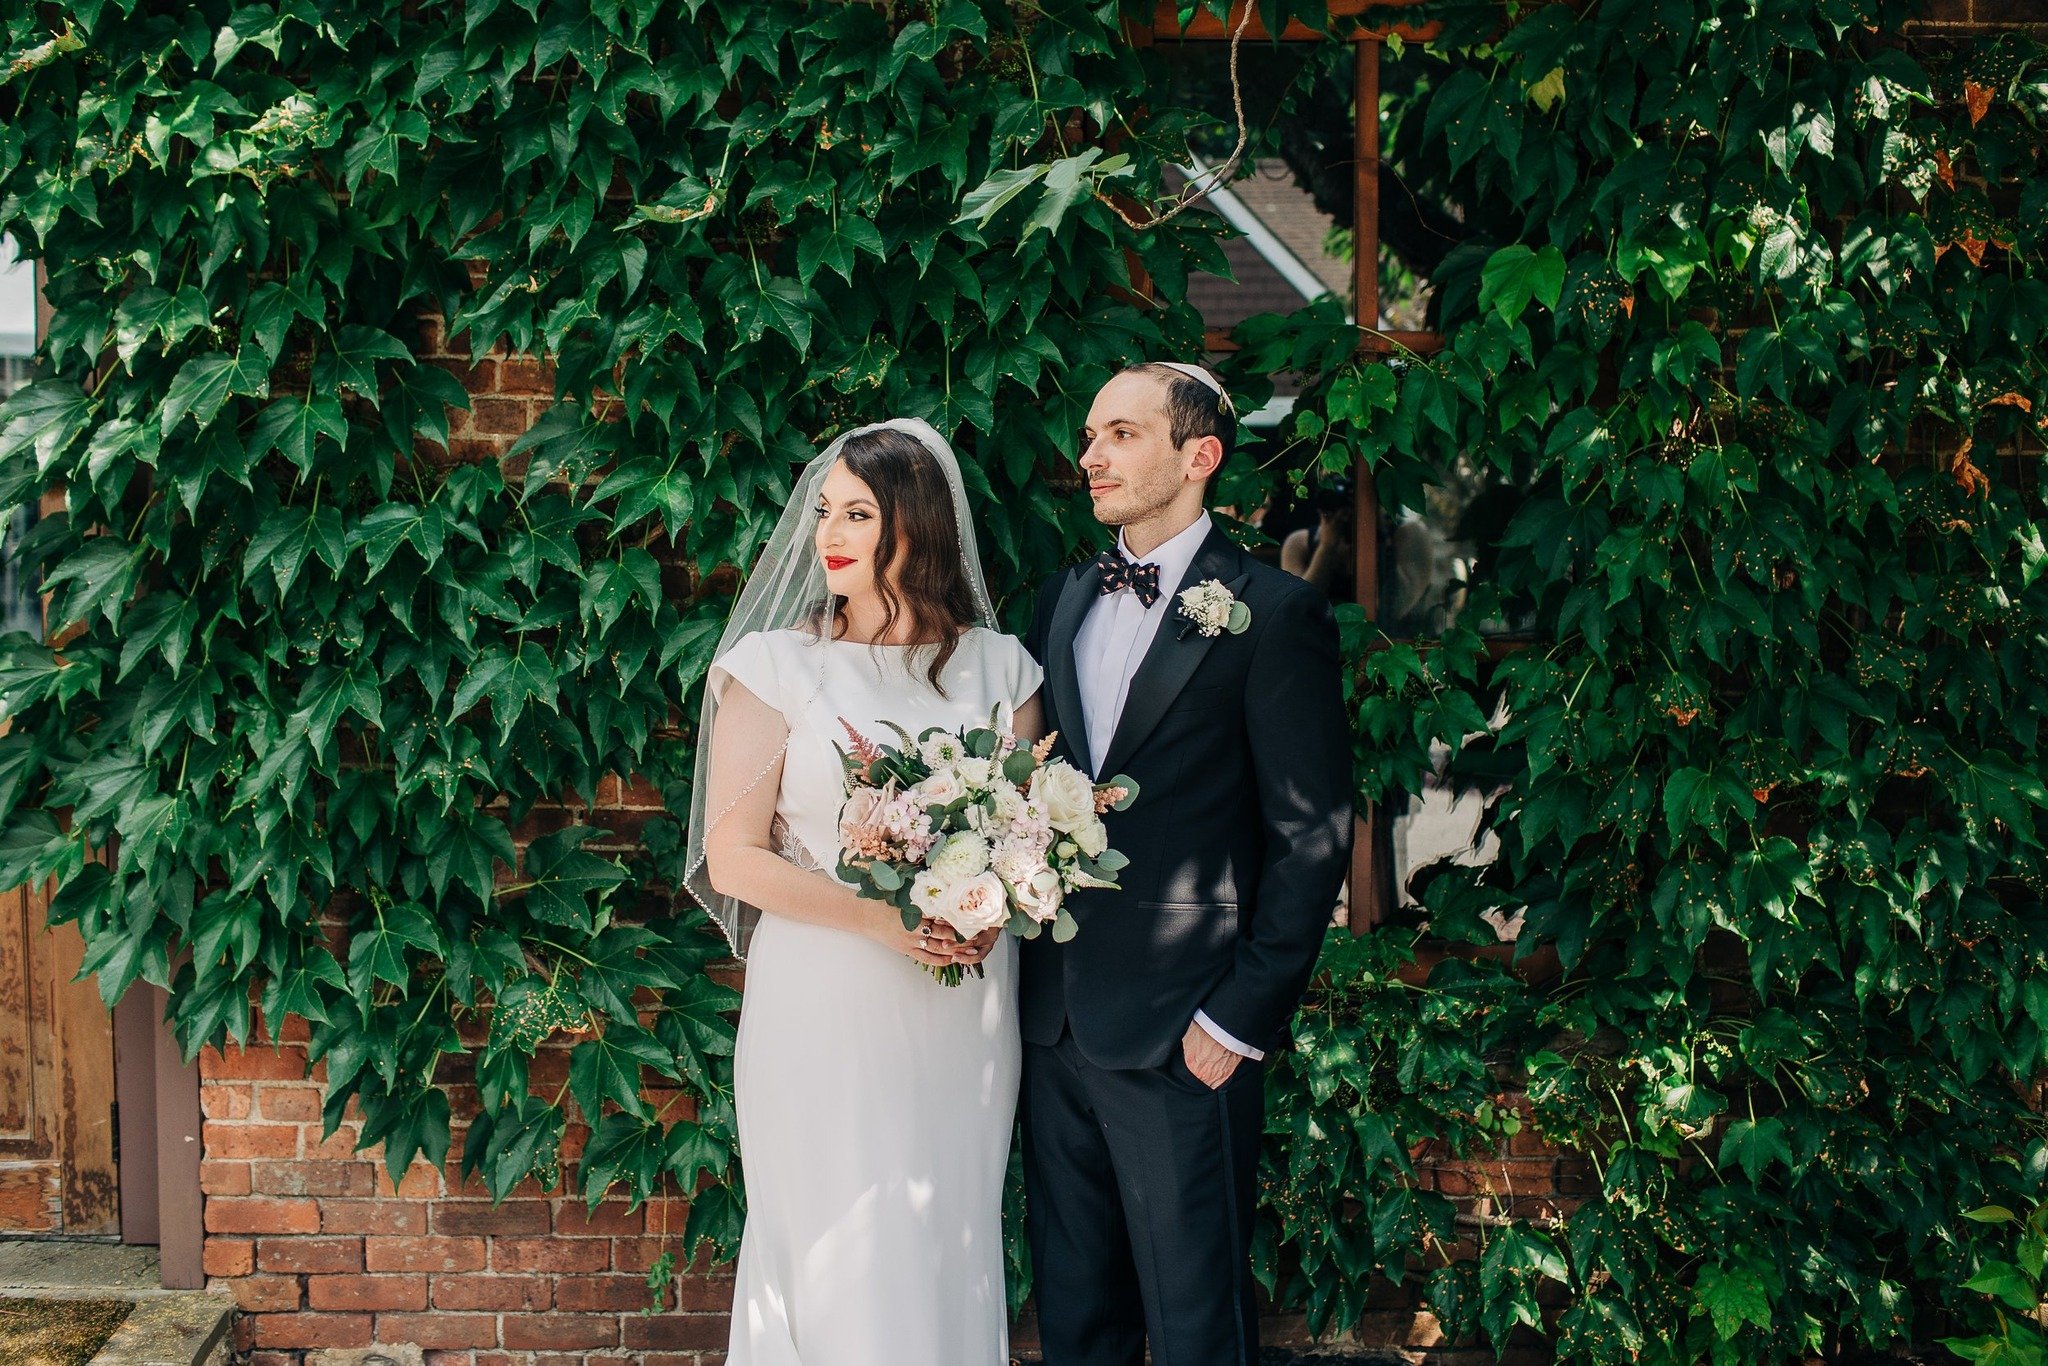 When Alina and I first connected, she told me that she was envisioning a slightly industrial garden and greenery vibe for her wedding day - and her wedding to Ilya at Brotherhood Winery in July delivered just that. It was a beautifully aesthetic day 